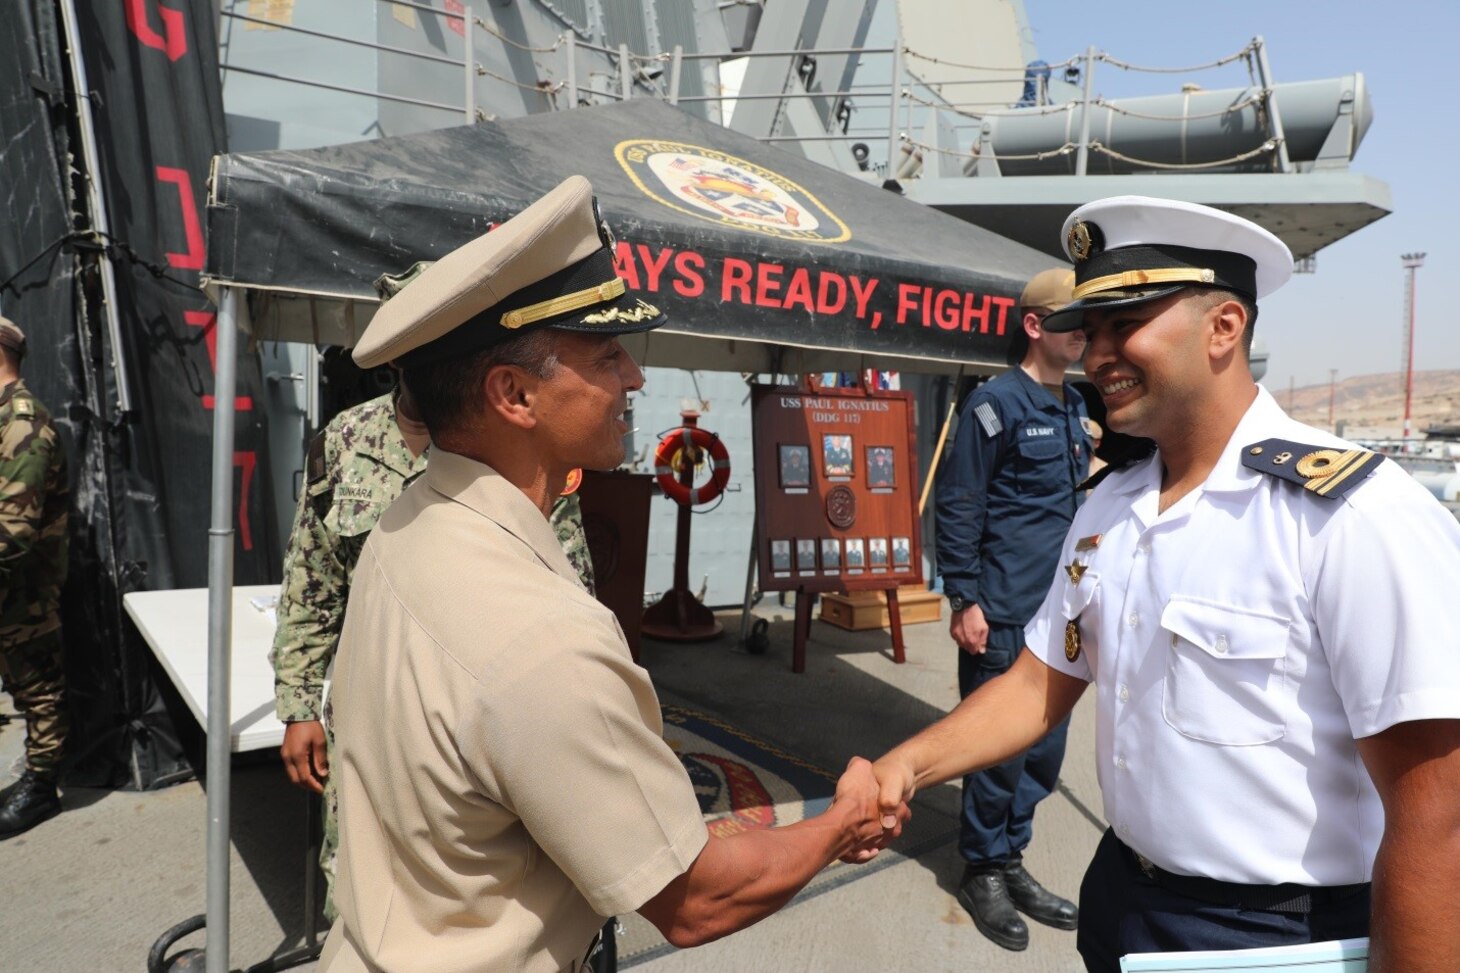 Cmdr. Corry Lougee, commanding officer of the Arleigh Burke-class guided-missile destroyer USS Paul Ignatius (DDG 117), welcomes aboard an officer from the Royal Moroccan Sigma-class corvette frigate RMNS Sultan Moulay Ismail (614), onboard in preparation for exercise Atlas Handshake 2023, Aug. 25, 2023. Paul Ignatius is on a scheduled deployment in the U.S. Naval Forces Europe area of operations, employed by the U.S. Sixth Fleet to defend U.S., allied and partner interests. (U.S. Navy photo by Mass Communication Specialist 1st Class Zac Shea)